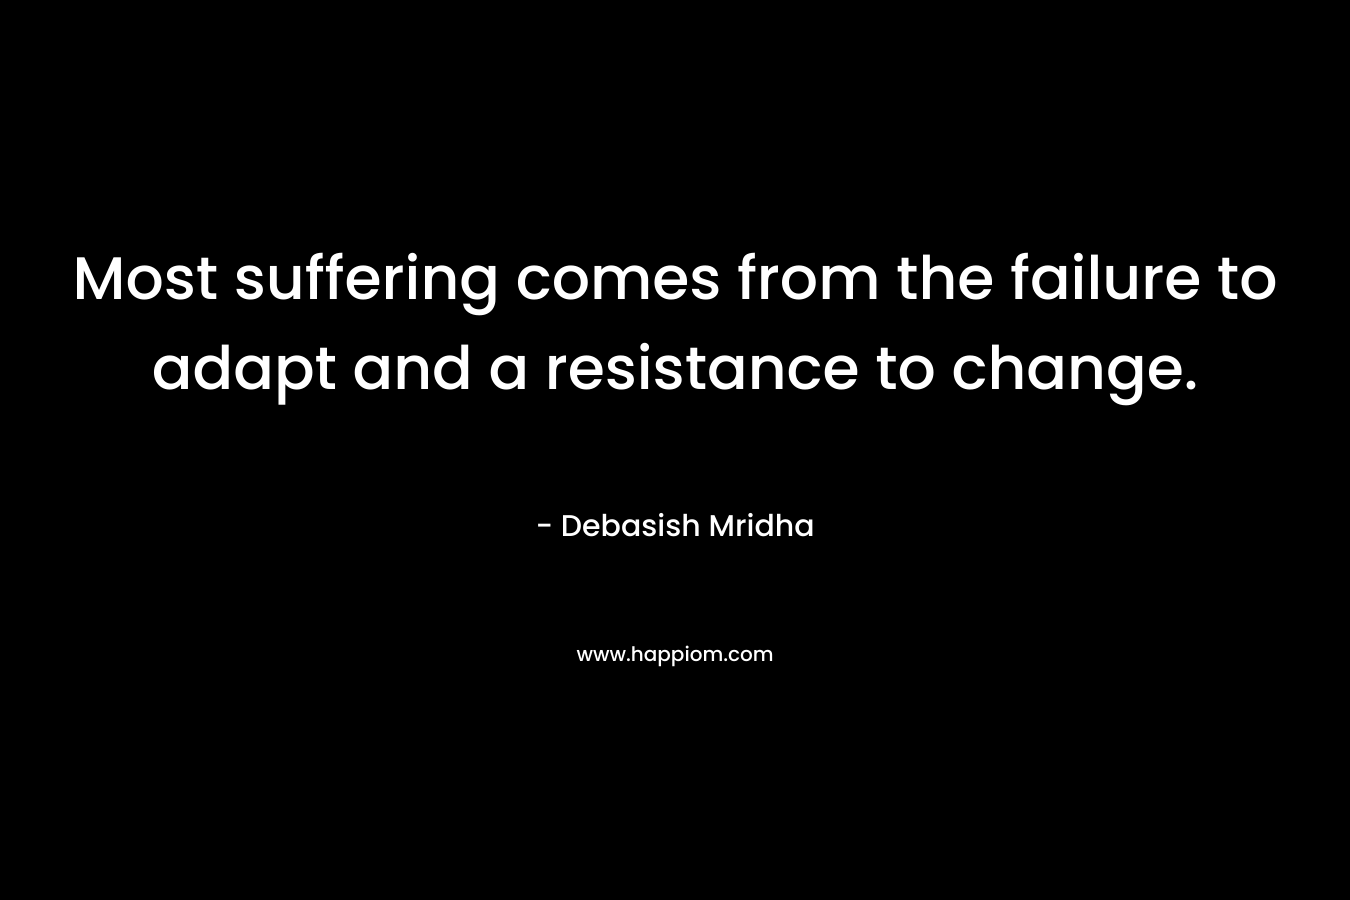 Most suffering comes from the failure to adapt and a resistance to change. – Debasish Mridha